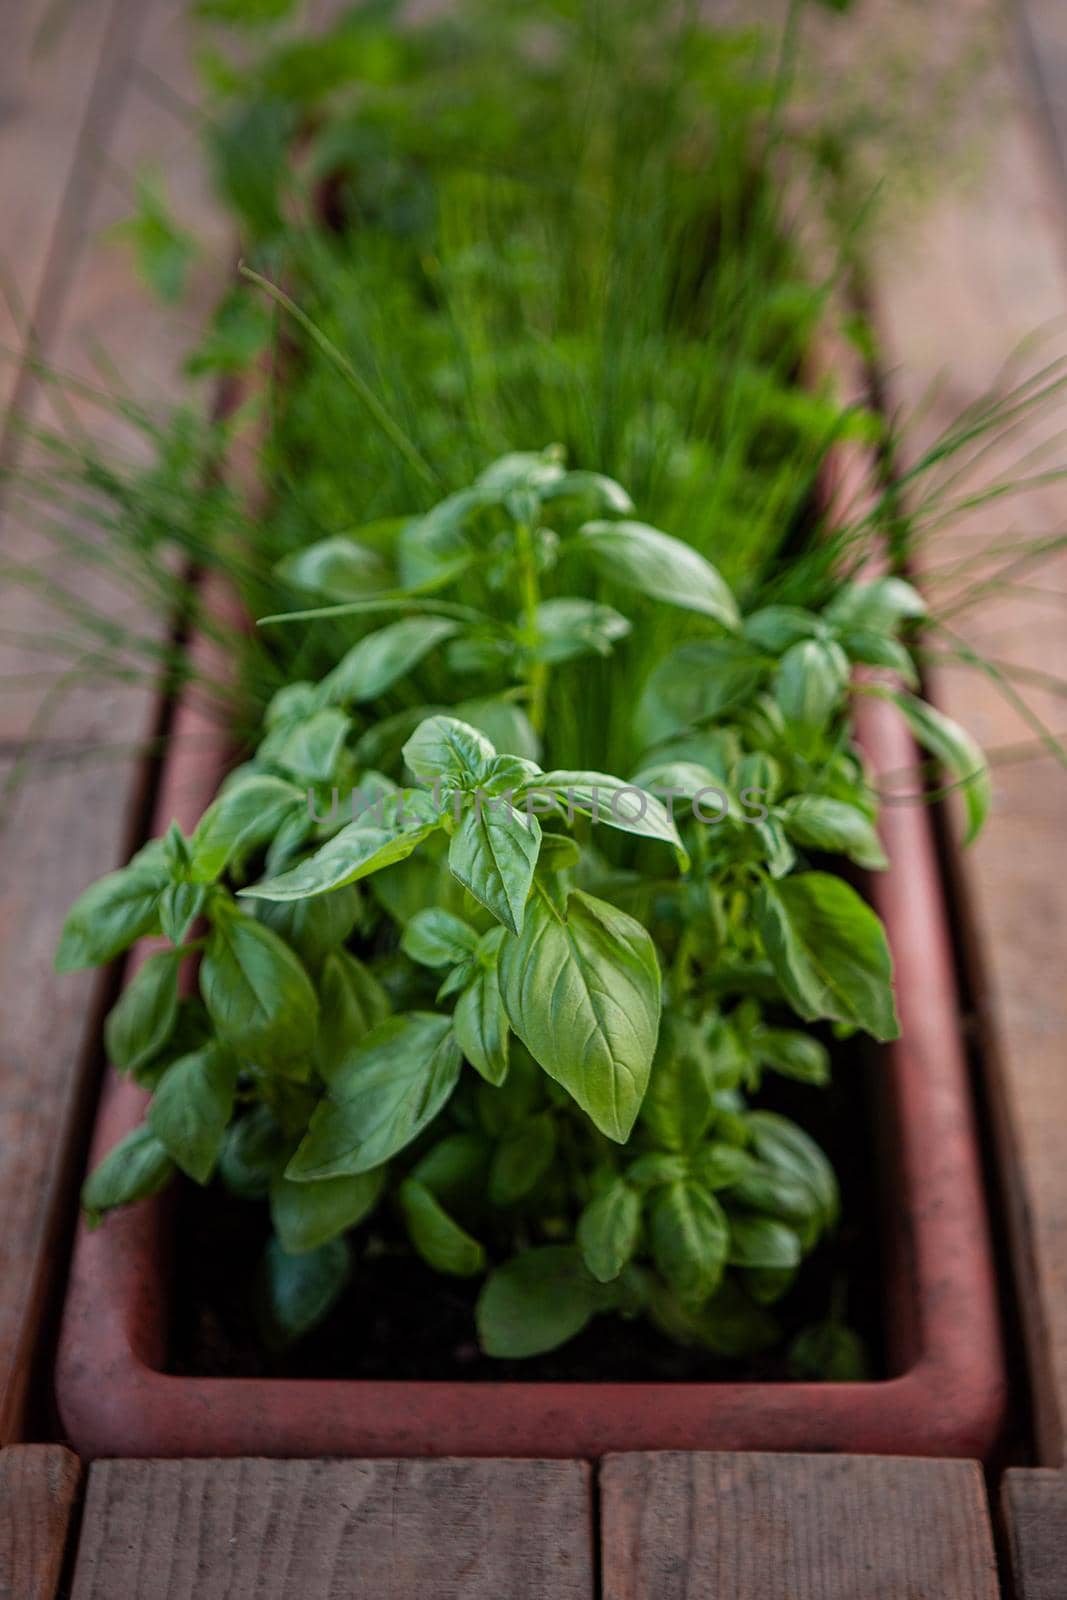 Basil and parsley on a table